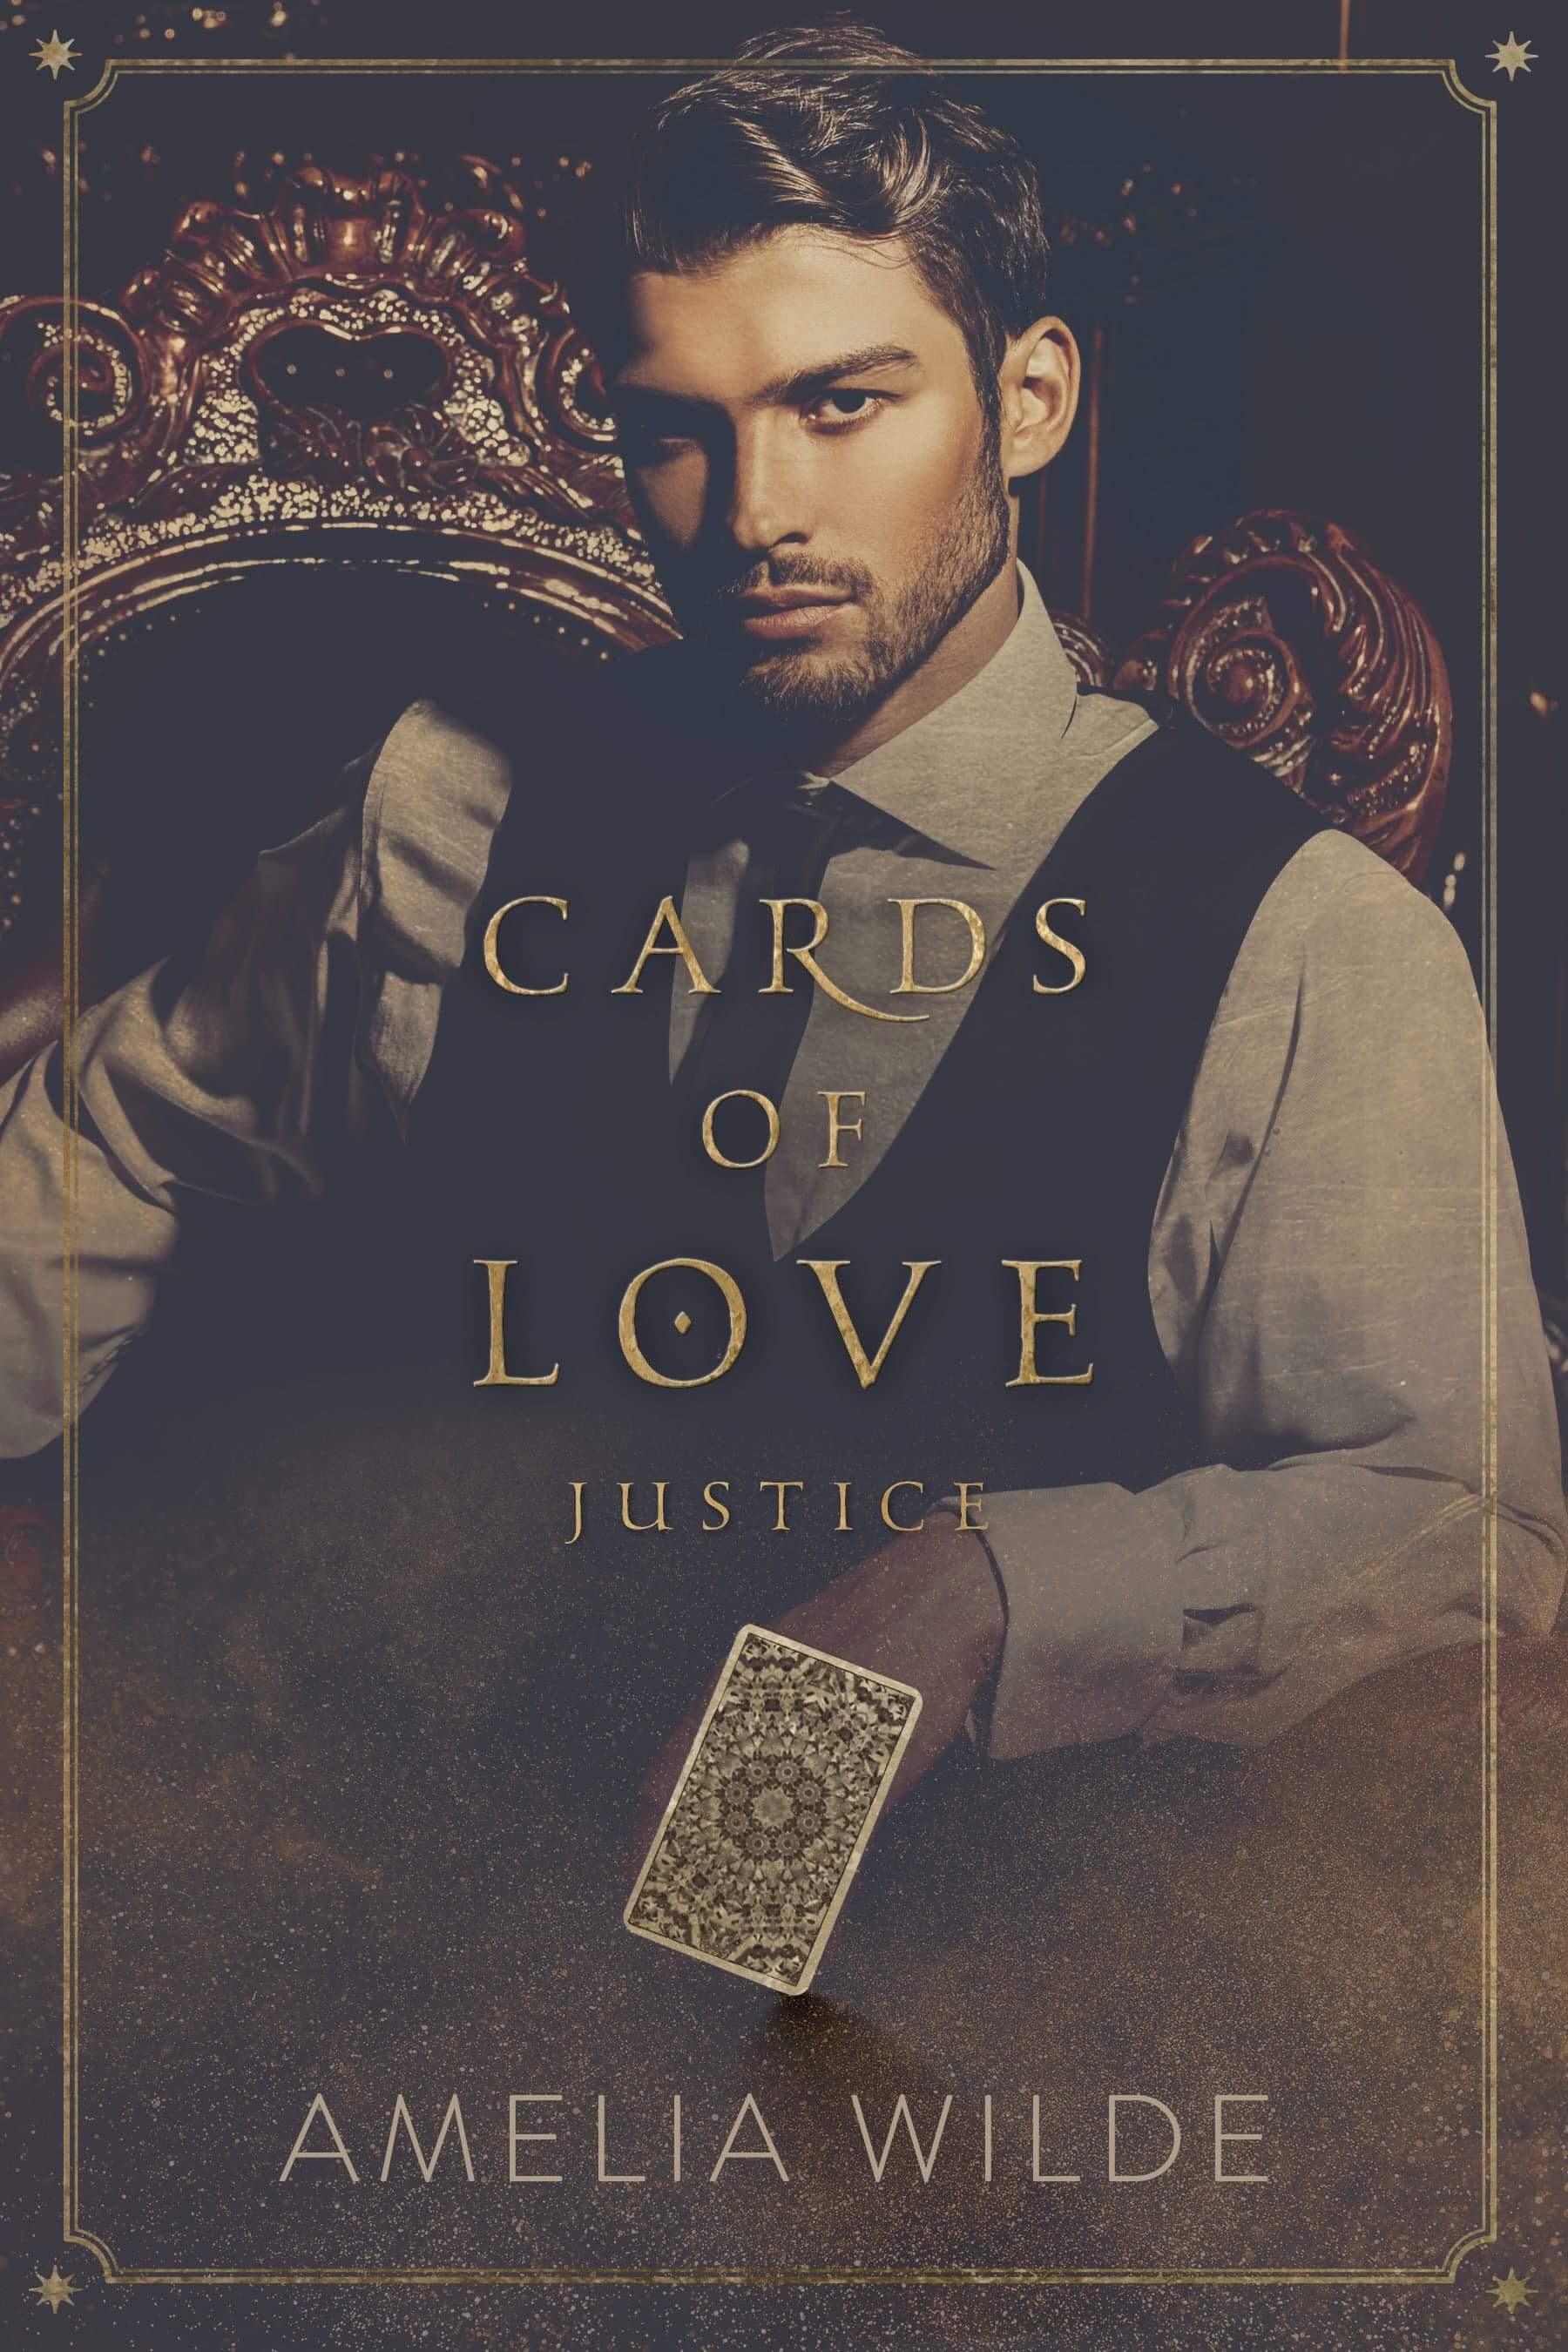 Cards of Love: Justice